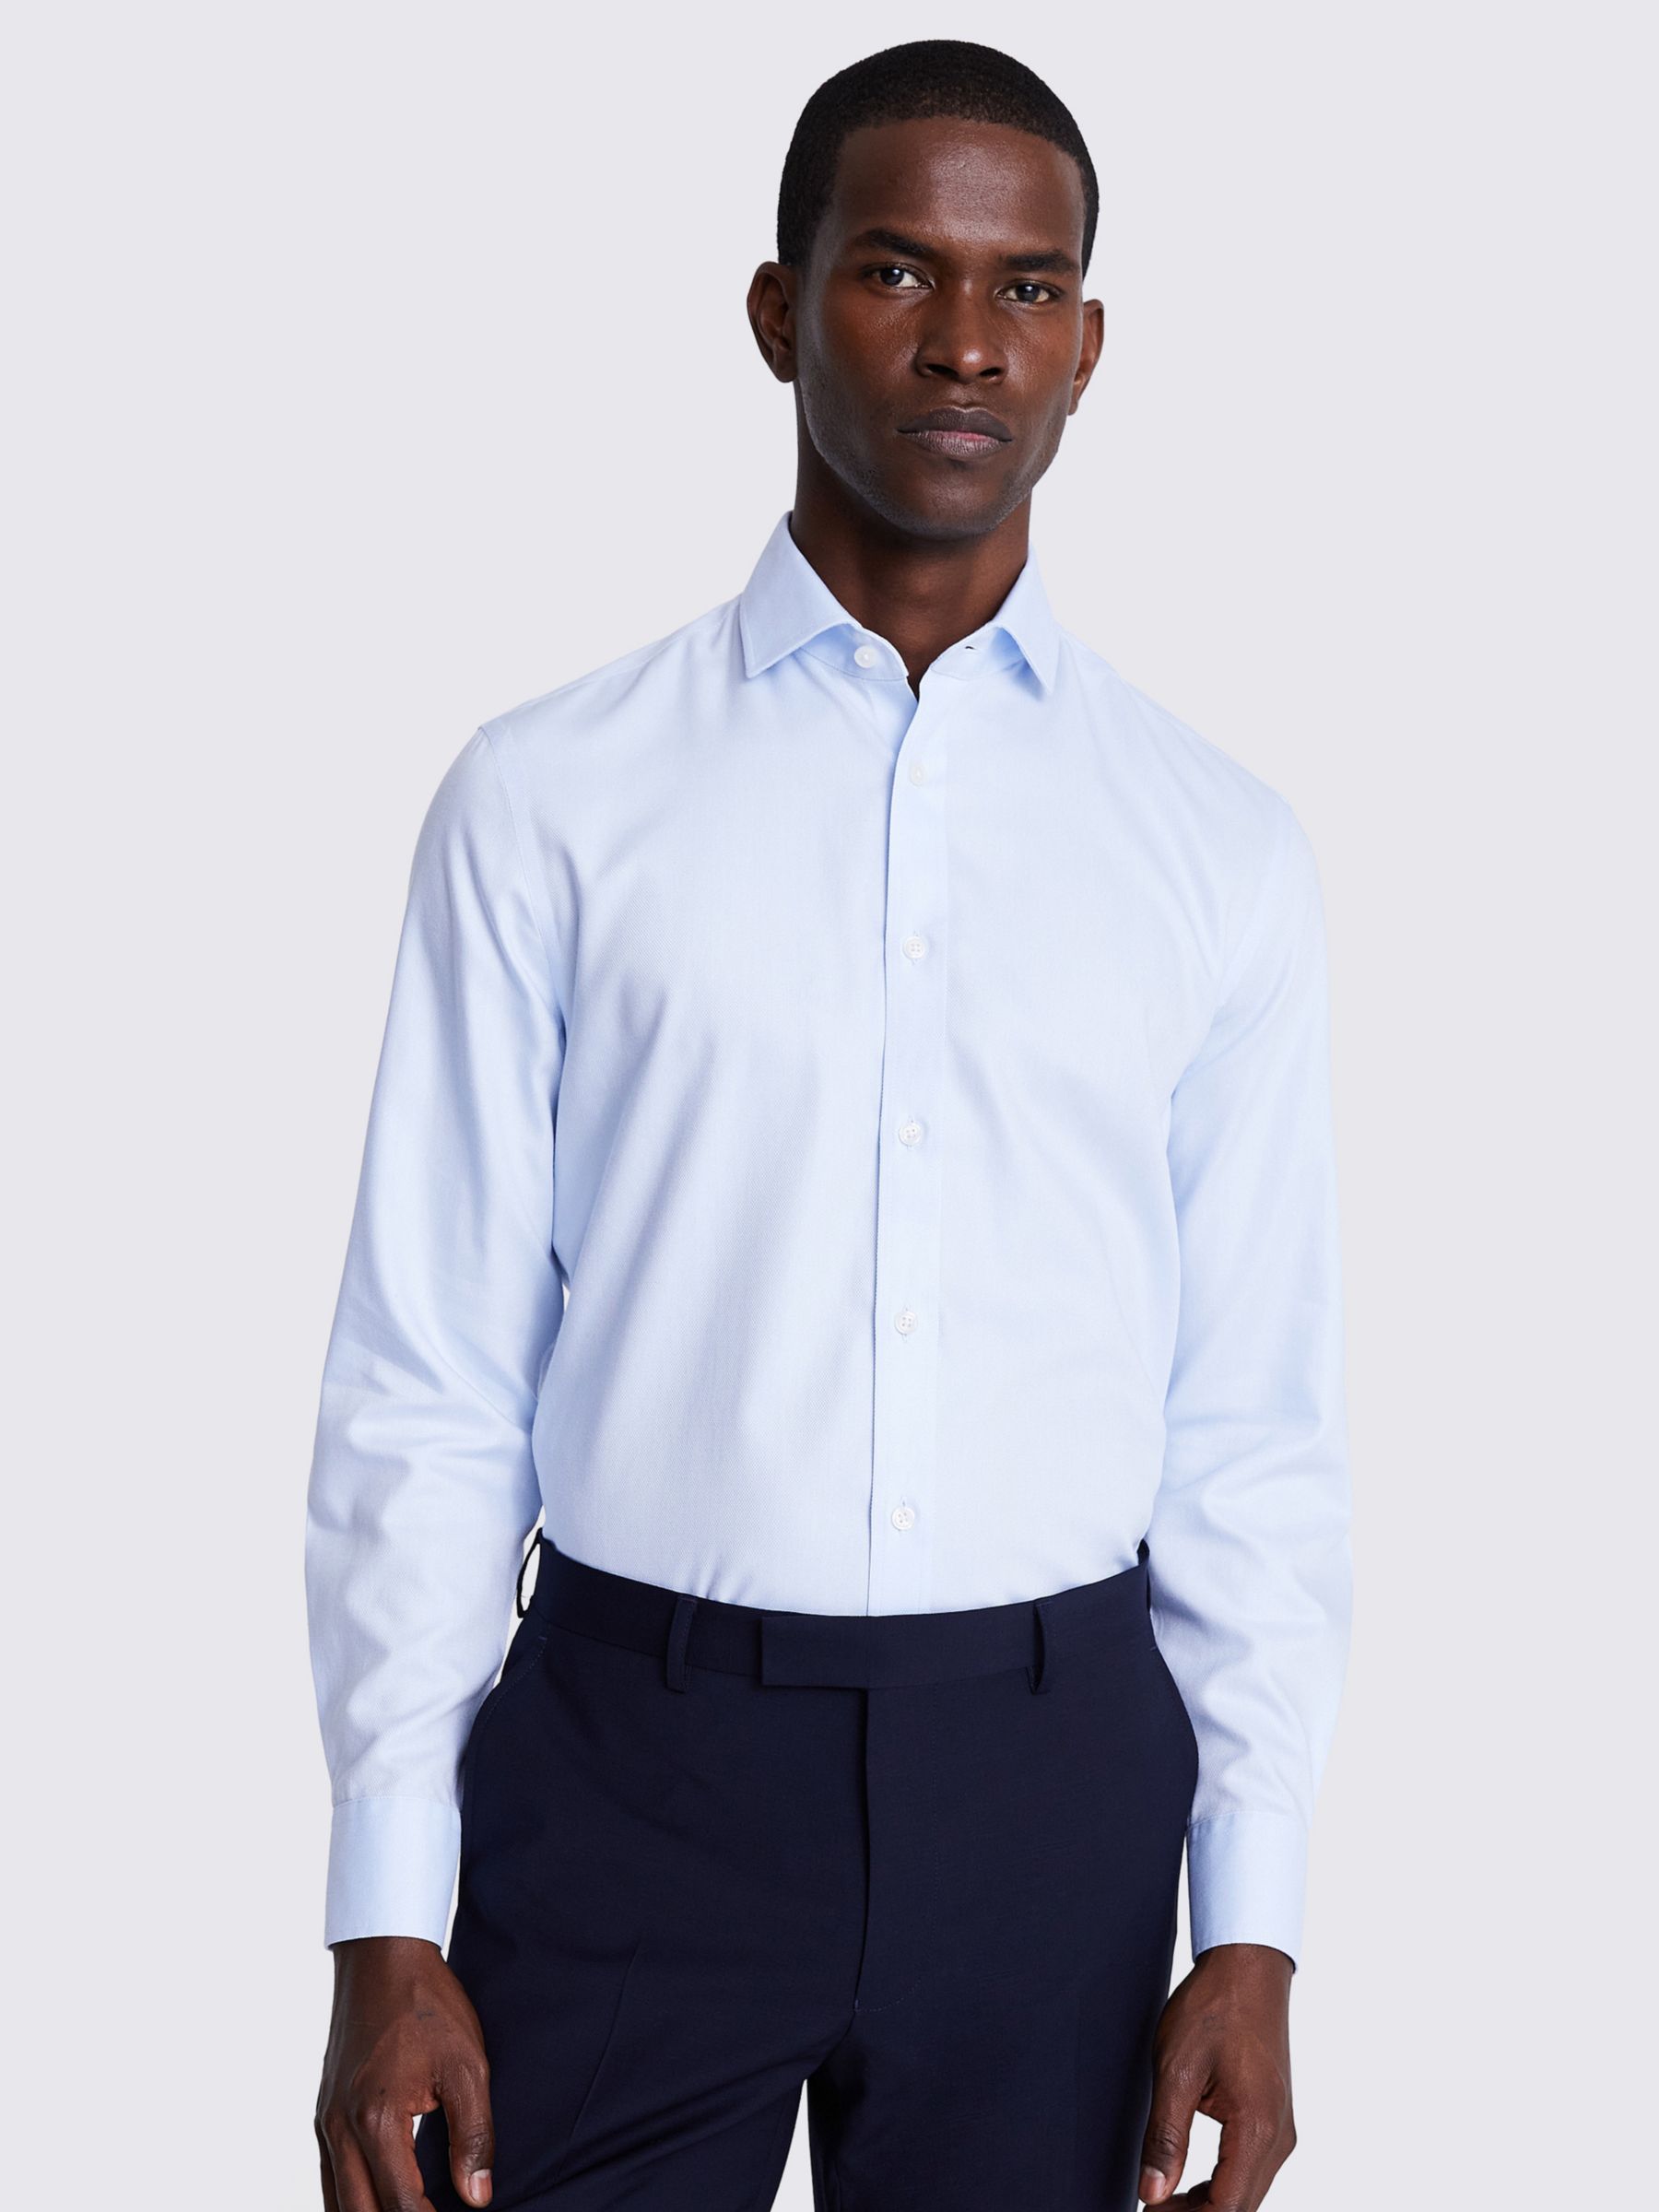 Moss Tailored Fit Royal Oxford Non-Iron Shirt, Blue, 17.5